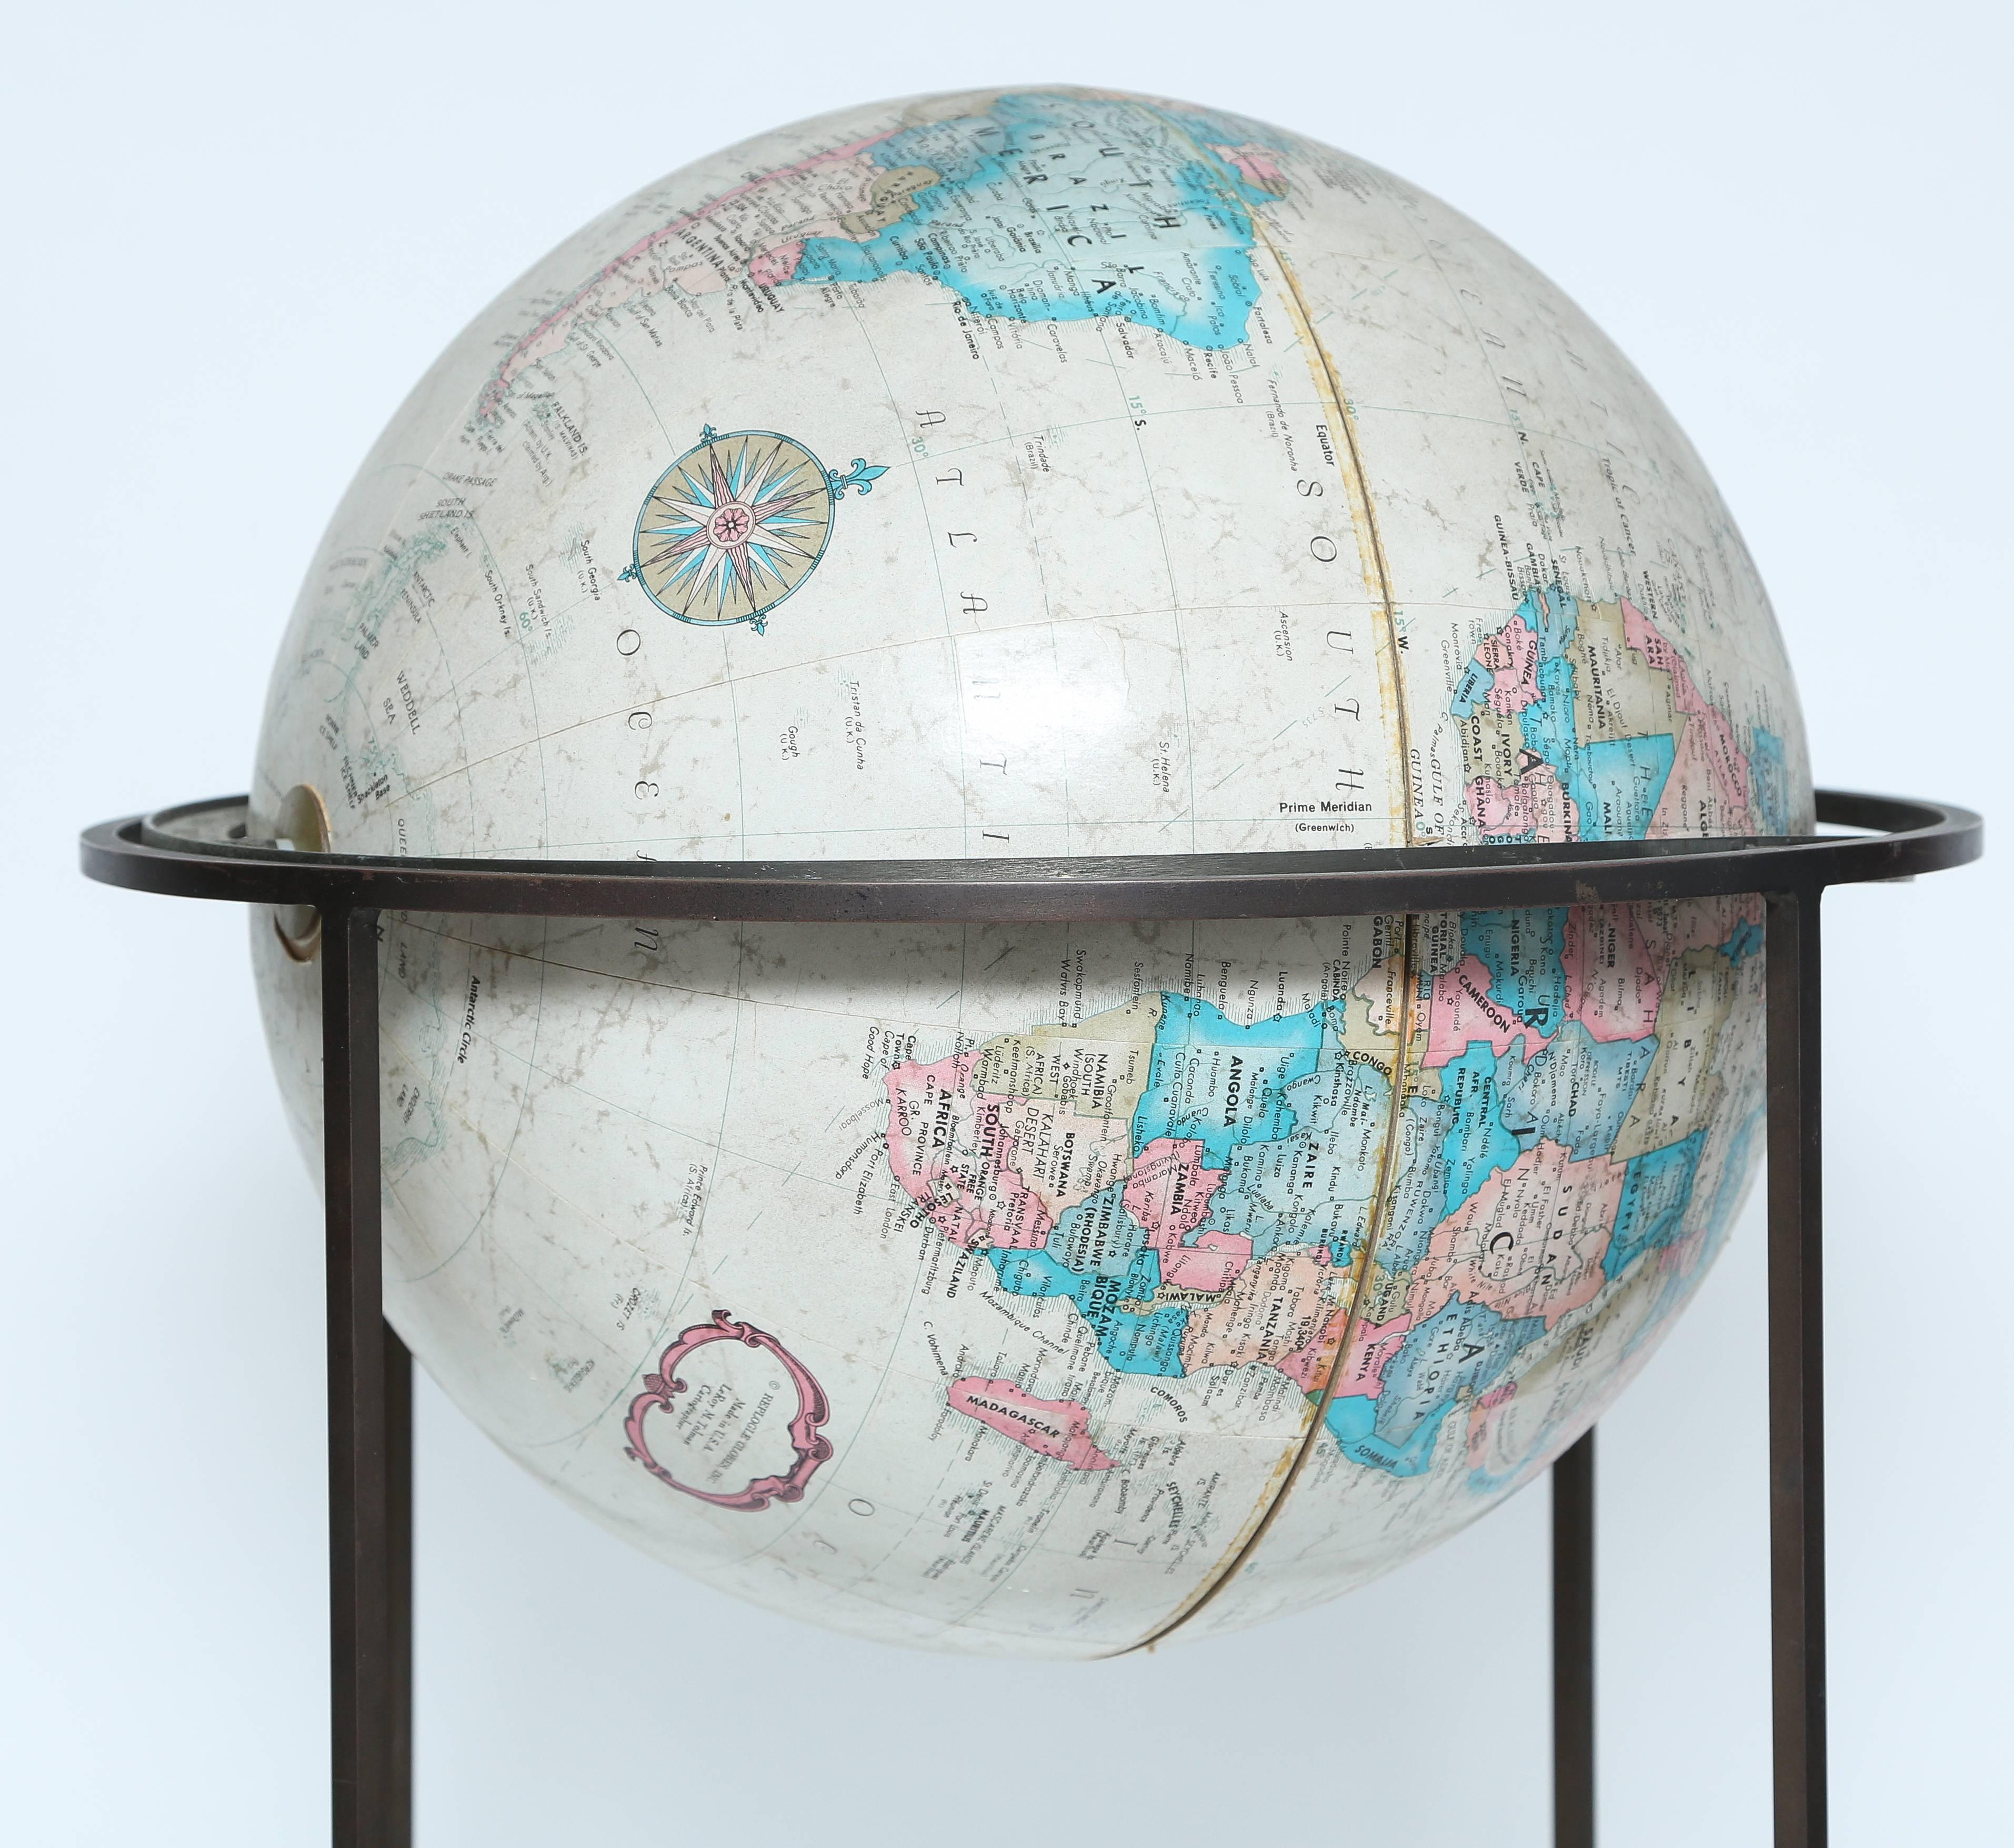 Old globe by Reploge. It tilts and pivots on its axis. Stand is constructed of brass and has a wonderful patina. This design is attributed to Paul McCobb. The actual size of globe is 16